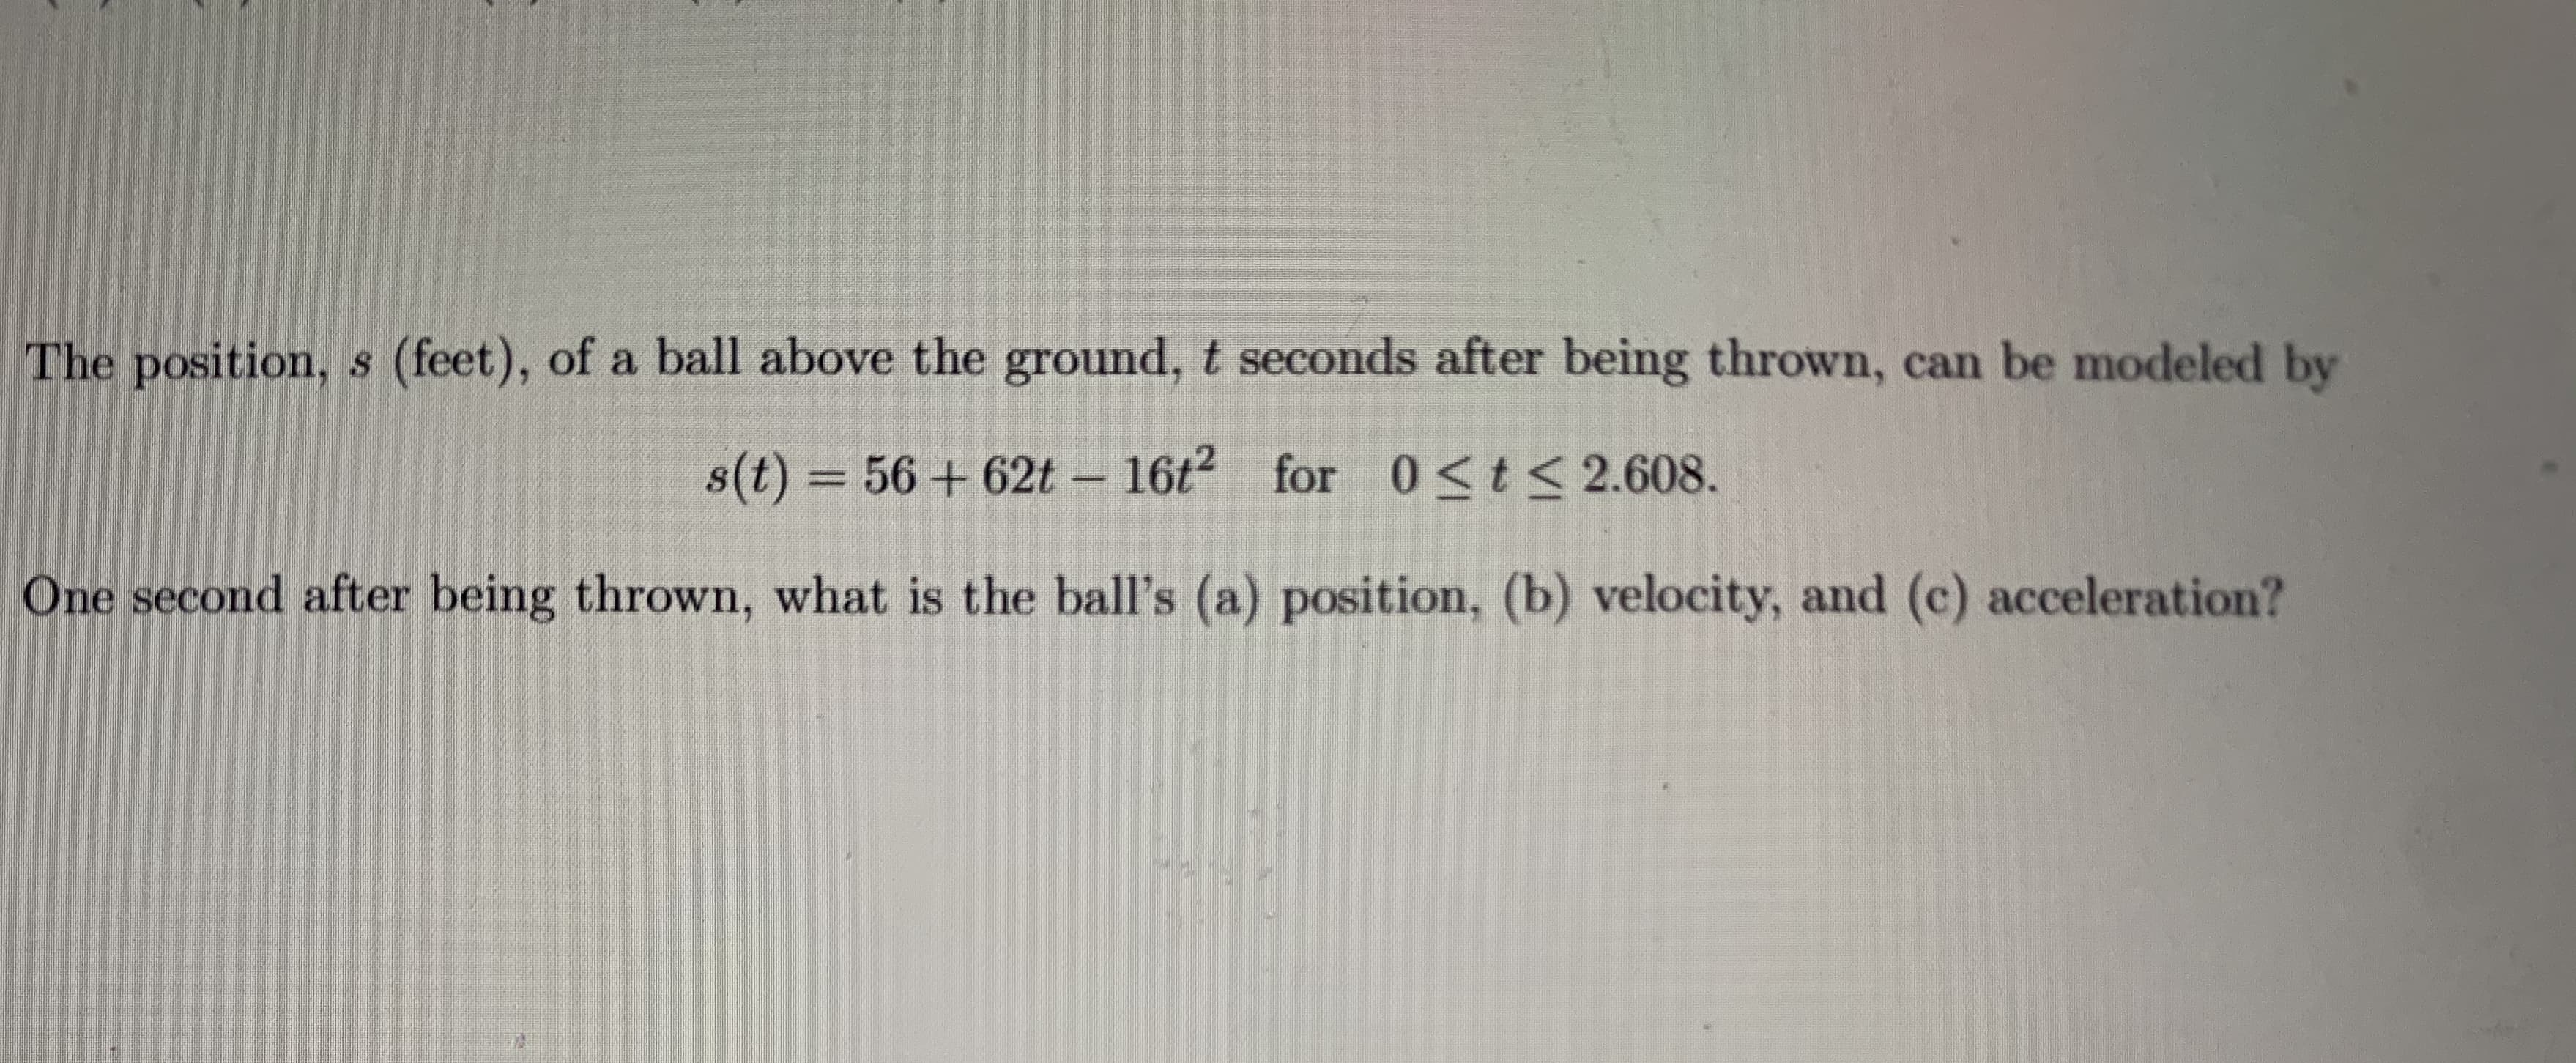 The position, s (feet), of a ball above the ground, t seconds after being thrown, can be modeled by
s(t) = 56 + 62t 16t for 0<t< 2.608.
One second after being thrown, what is the ball's (a) position, (b) velocity, and (c) acceleration?
